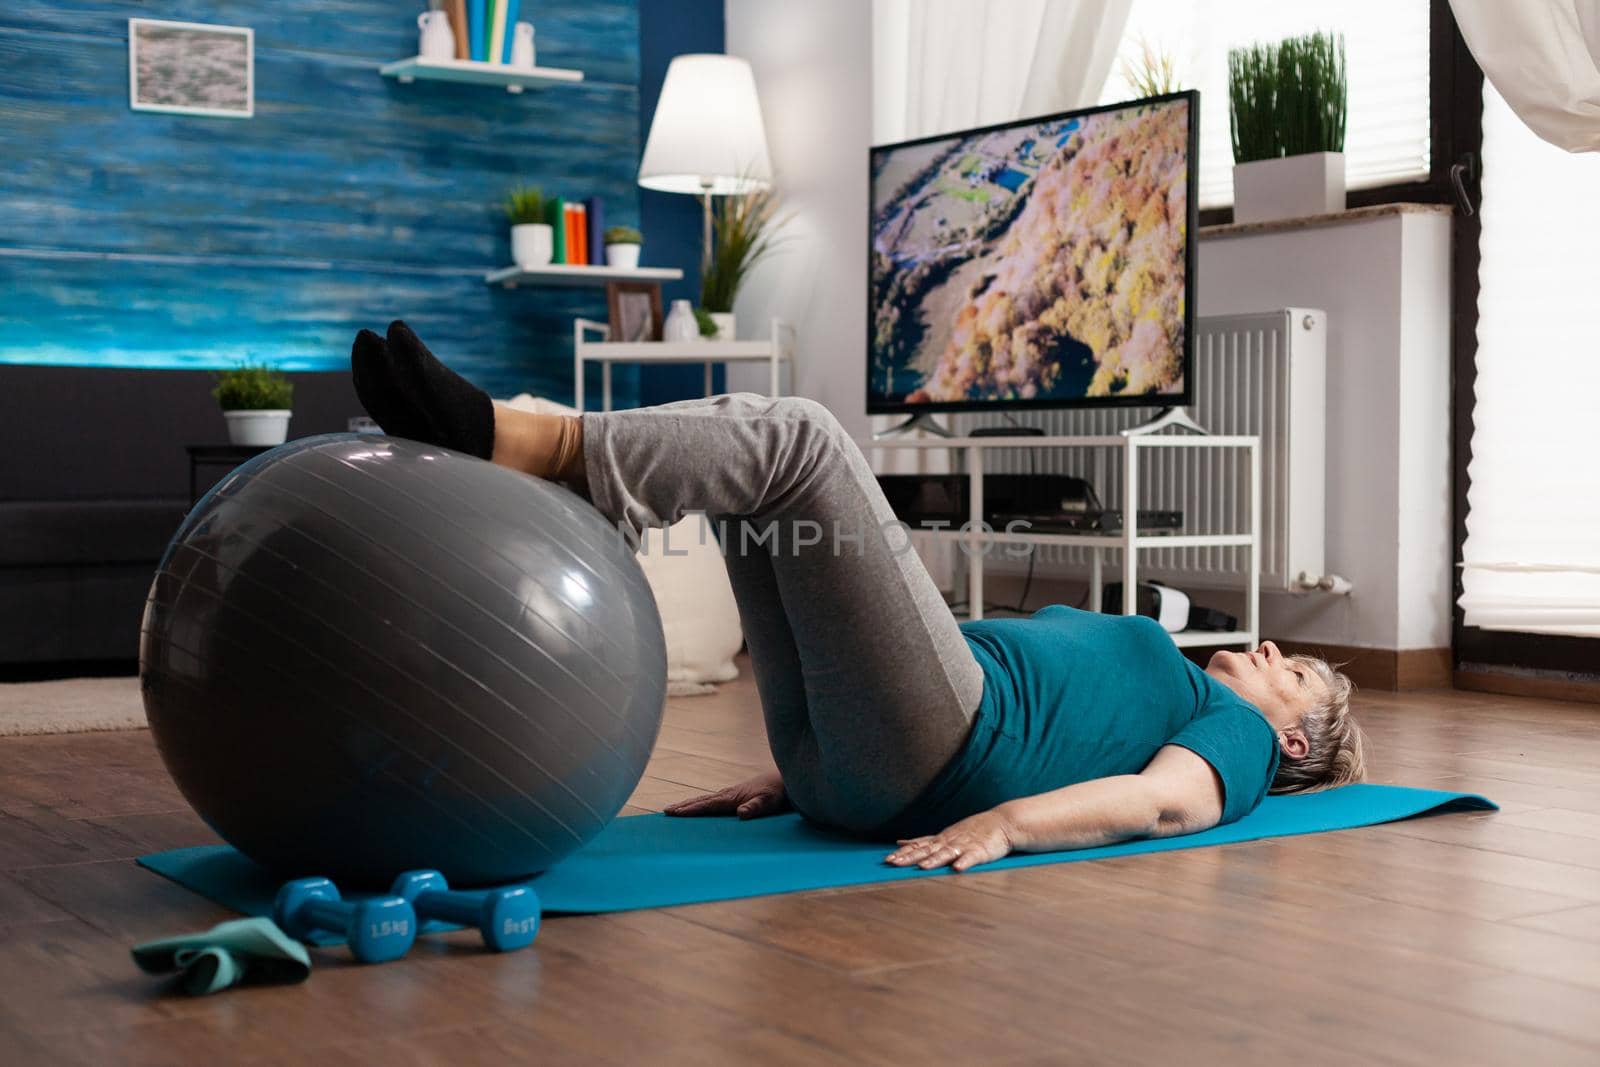 Retired senior woman doing practicing legs up exercise using swiss ball sitting on yoga mat in living room. Retired pensioner in sportswear practicing abs cardio working at body muscular healthcare